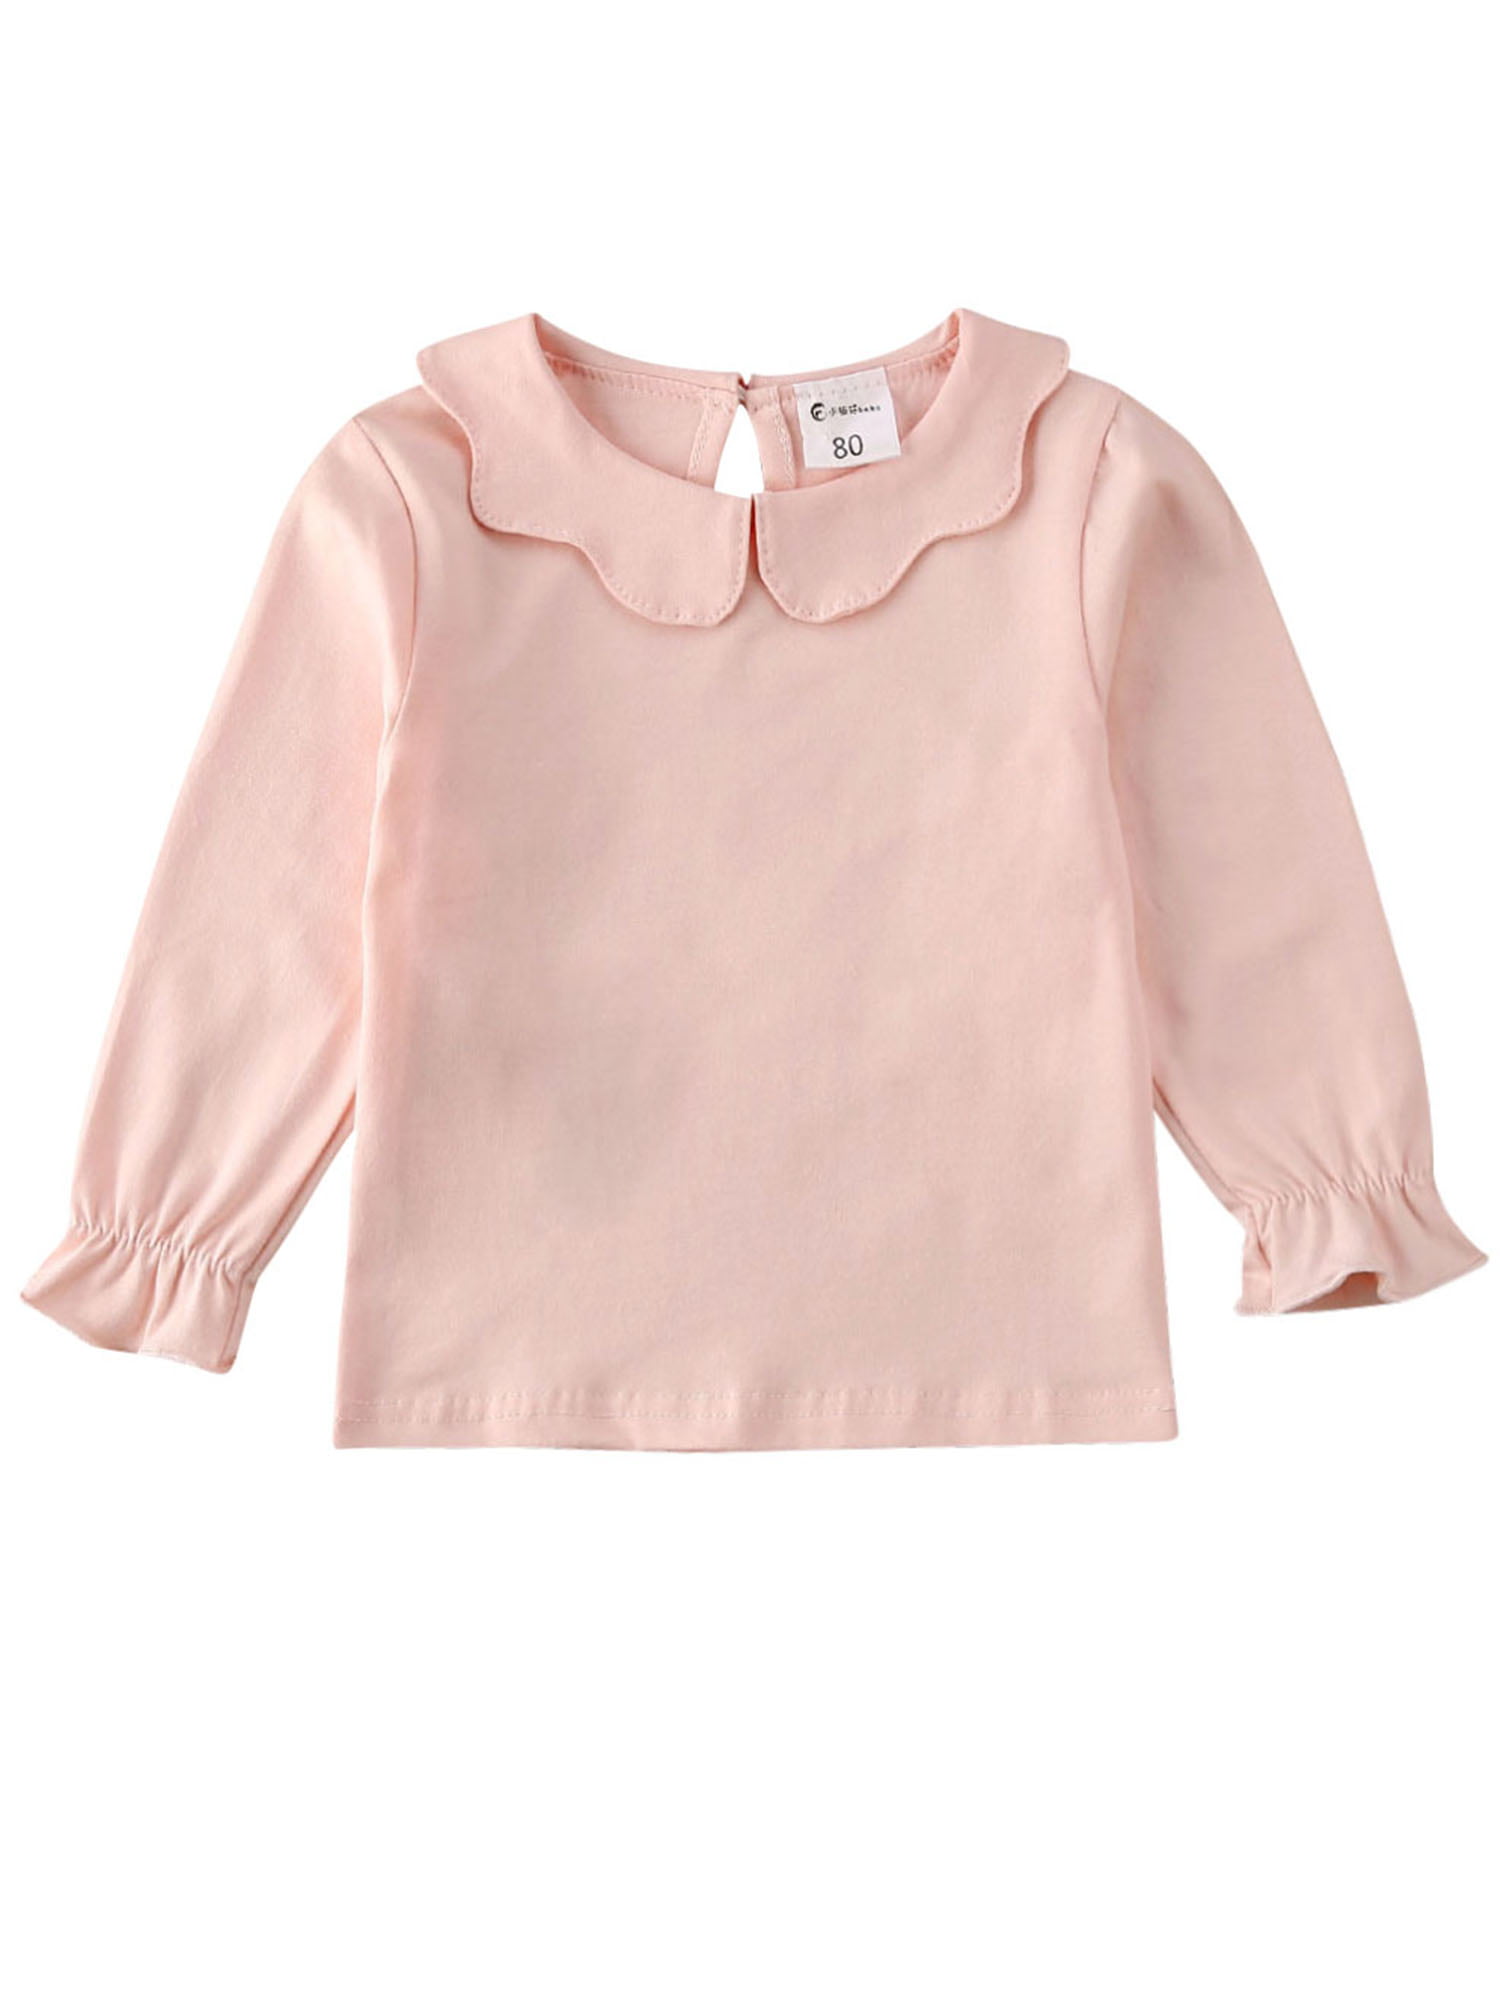 Baby Girl Kids Blouses Long Sleeves Solid Color Doll Collar T-Shirt Top Bottom